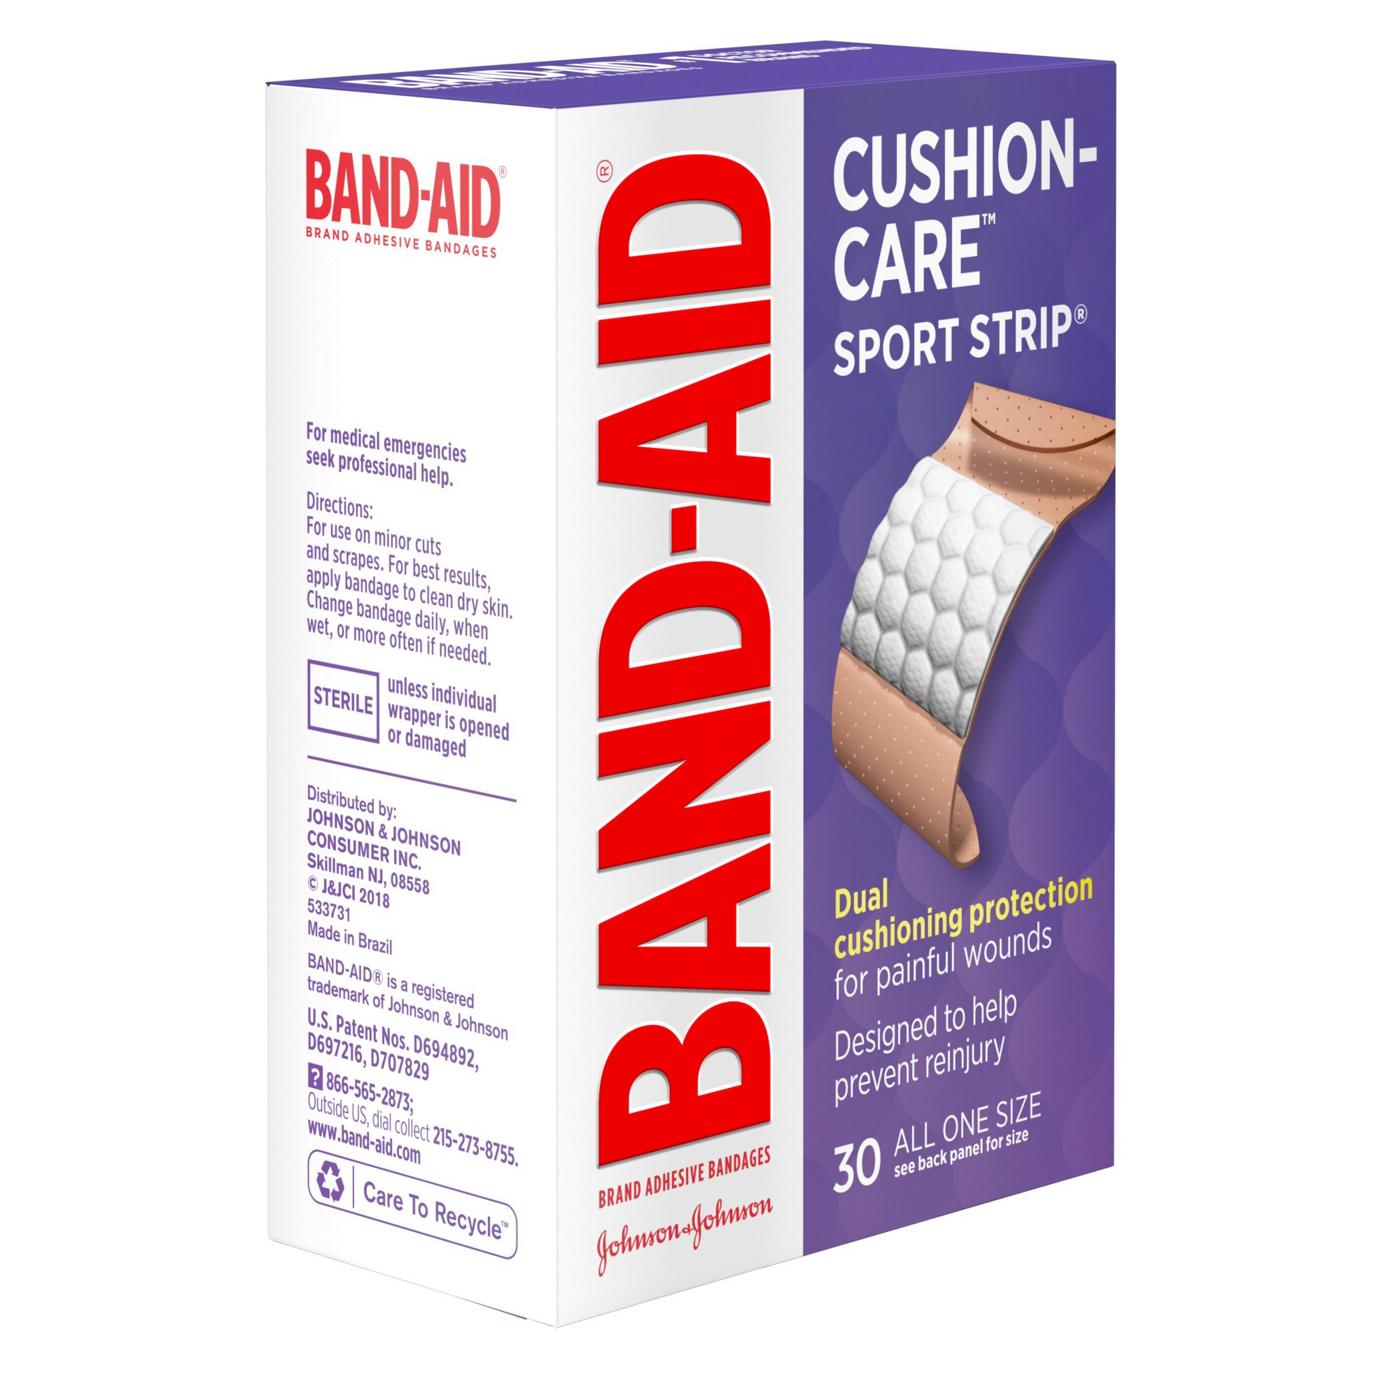 Band-Aid Brand Cushion Care Sport Strip Adhesive Bandages; image 4 of 4